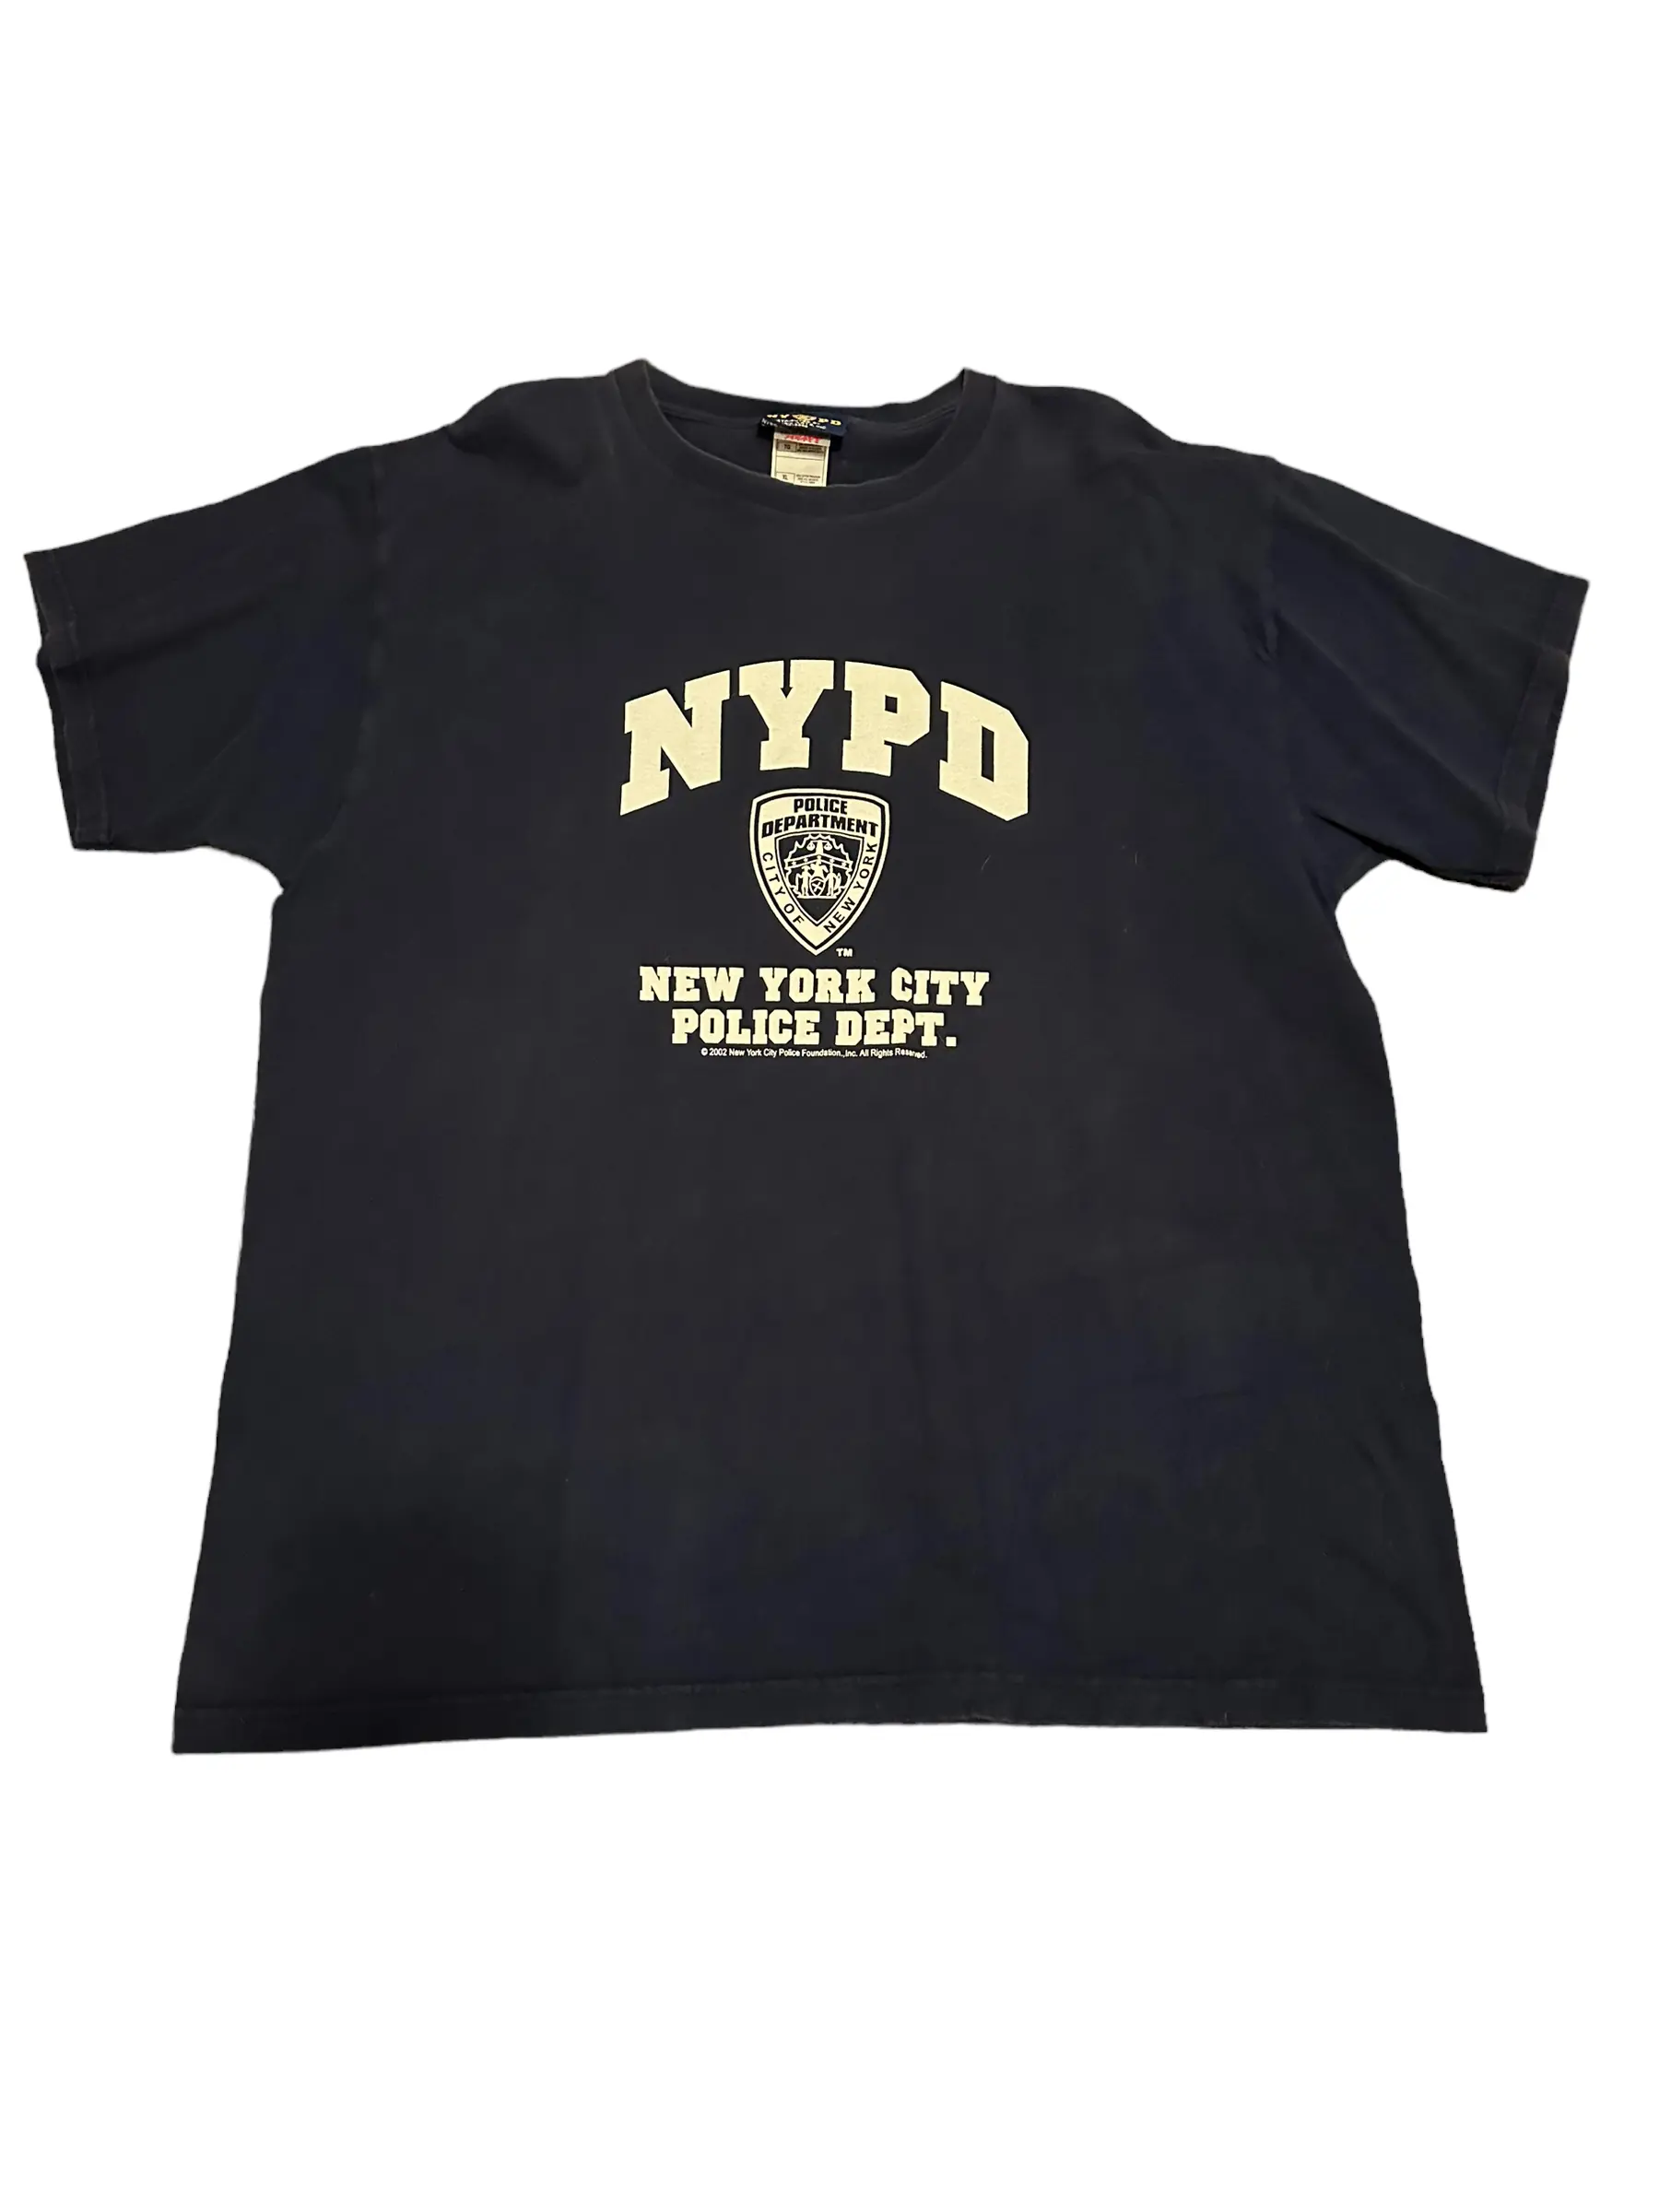 2002 NYPD